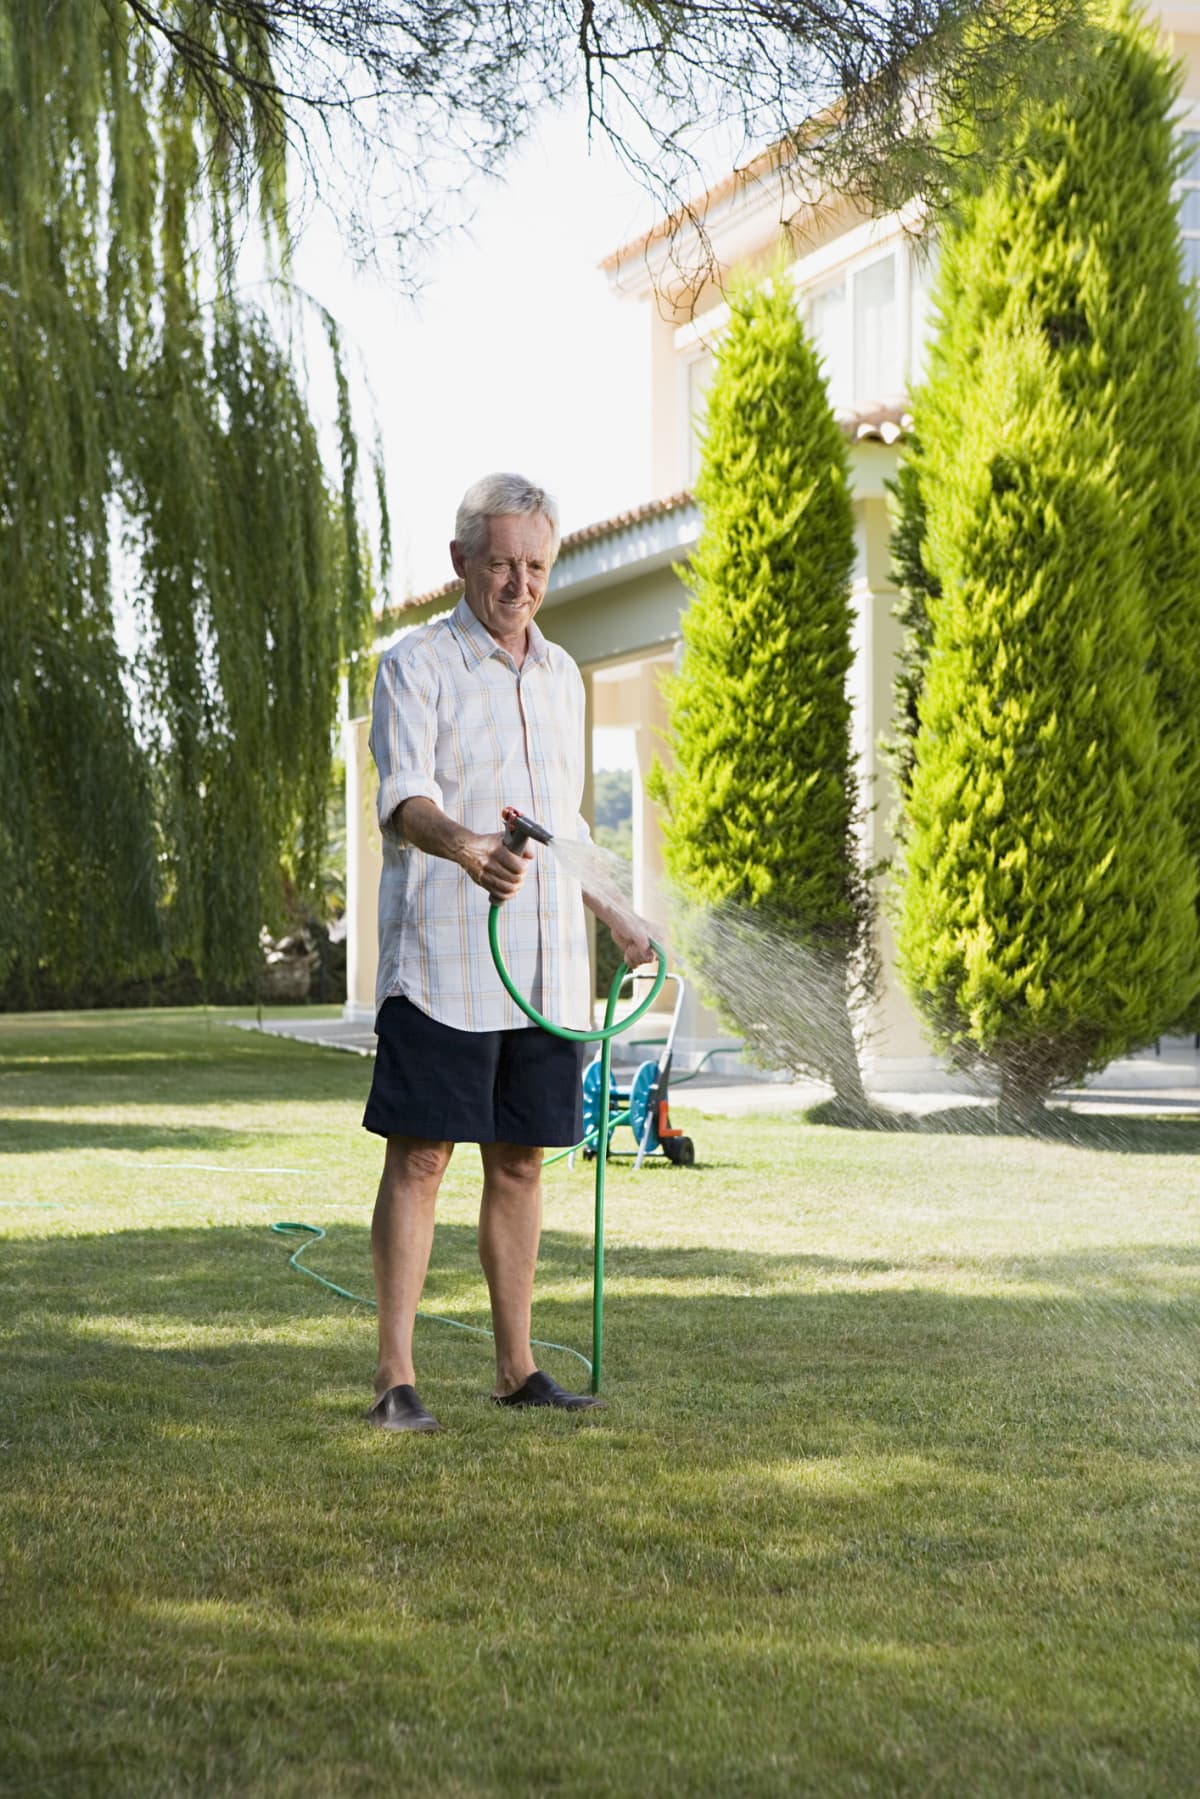 An elderly adult applying liquid iron to his lawn